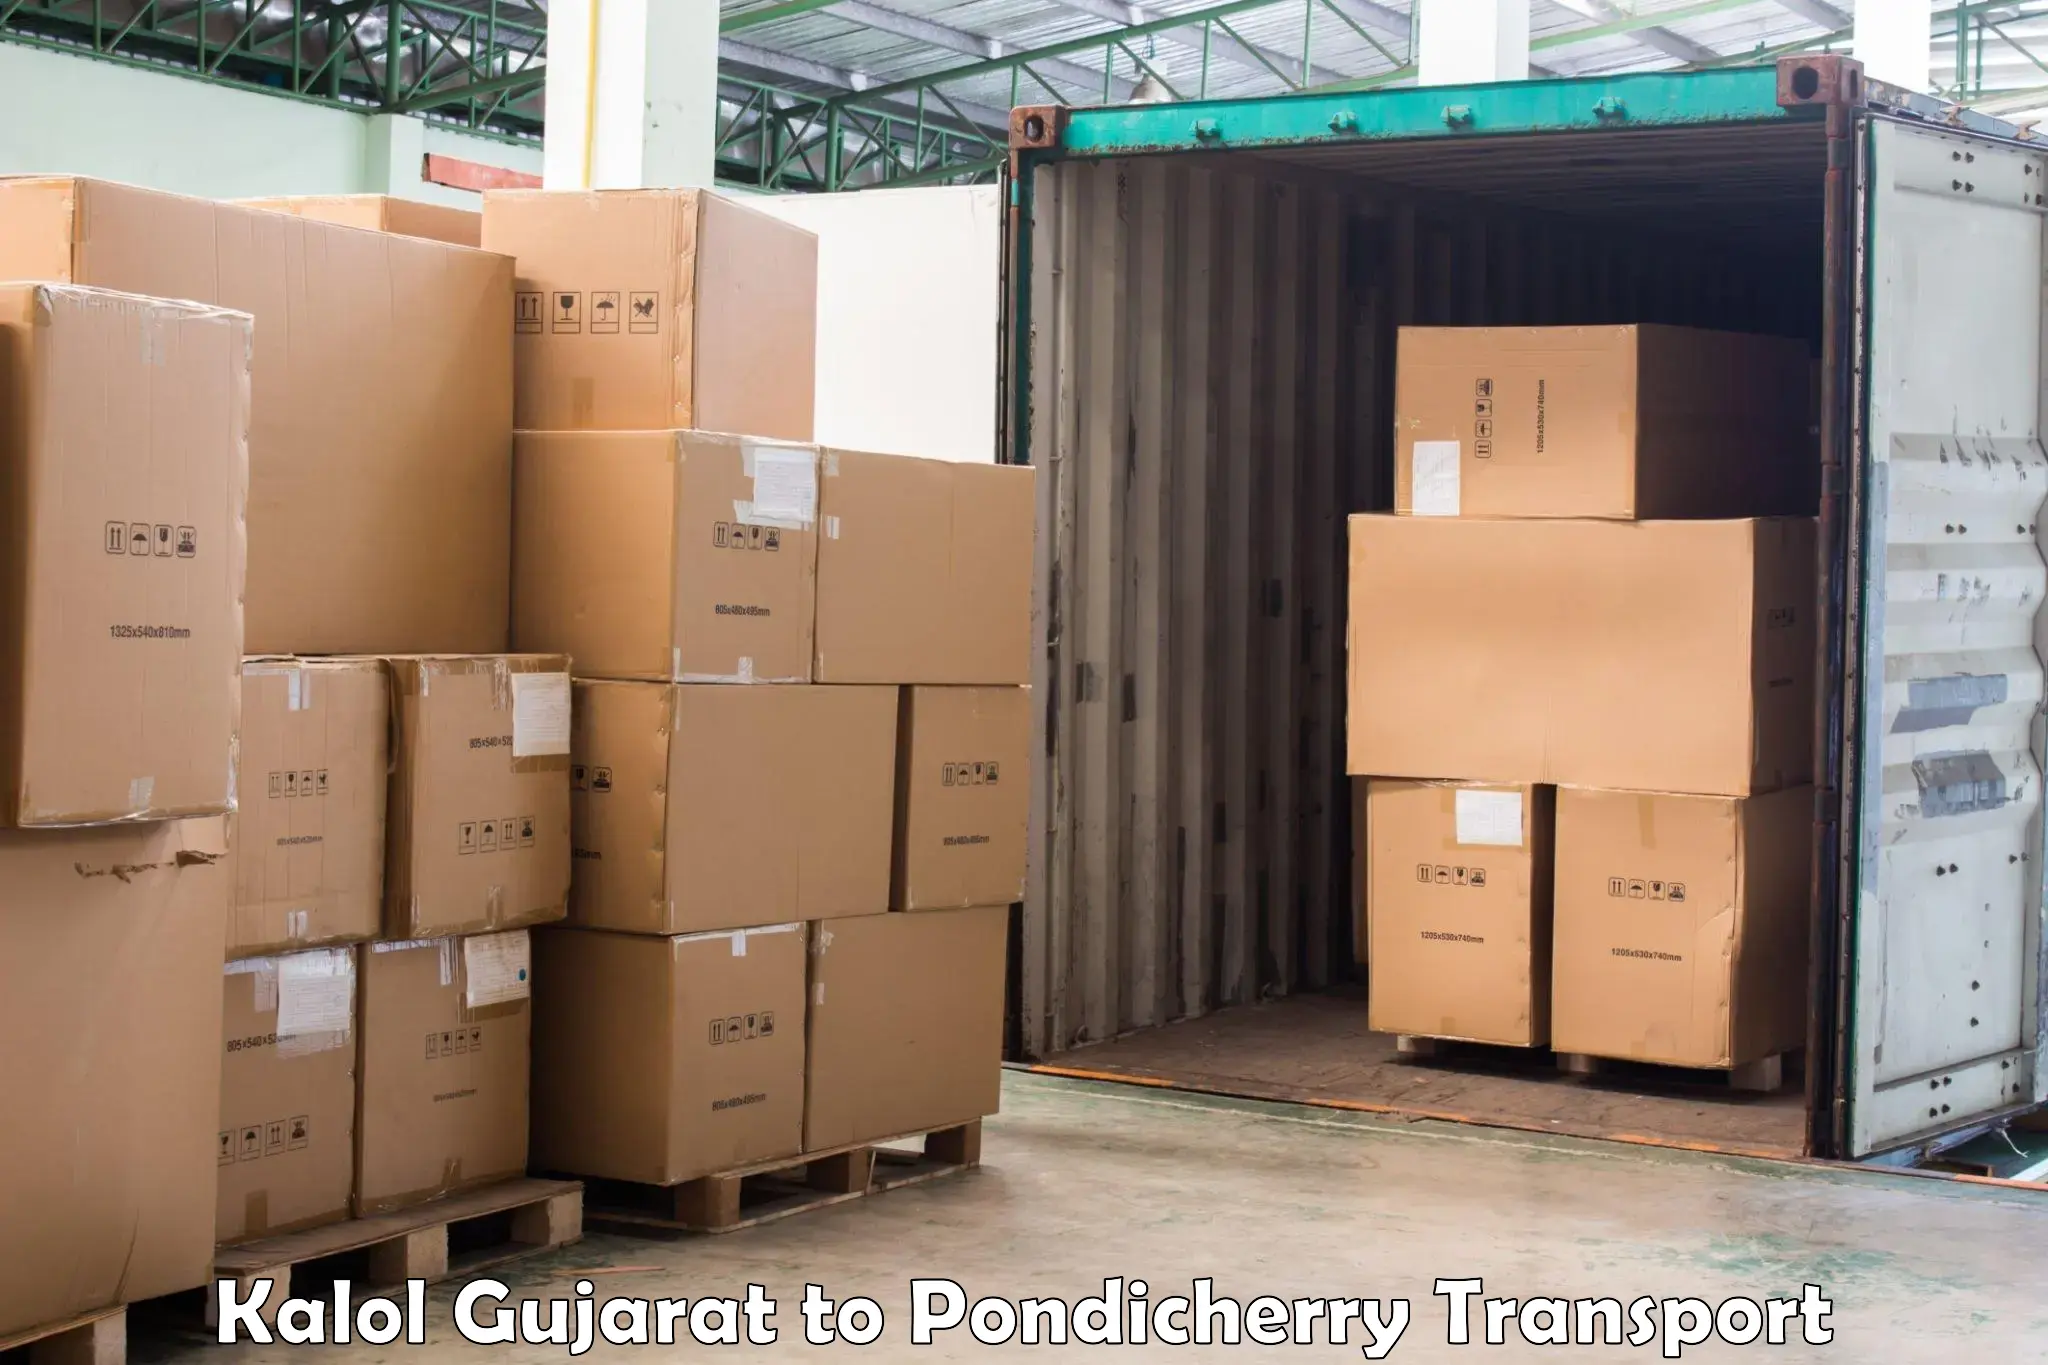 Transport bike from one state to another Kalol Gujarat to Pondicherry University